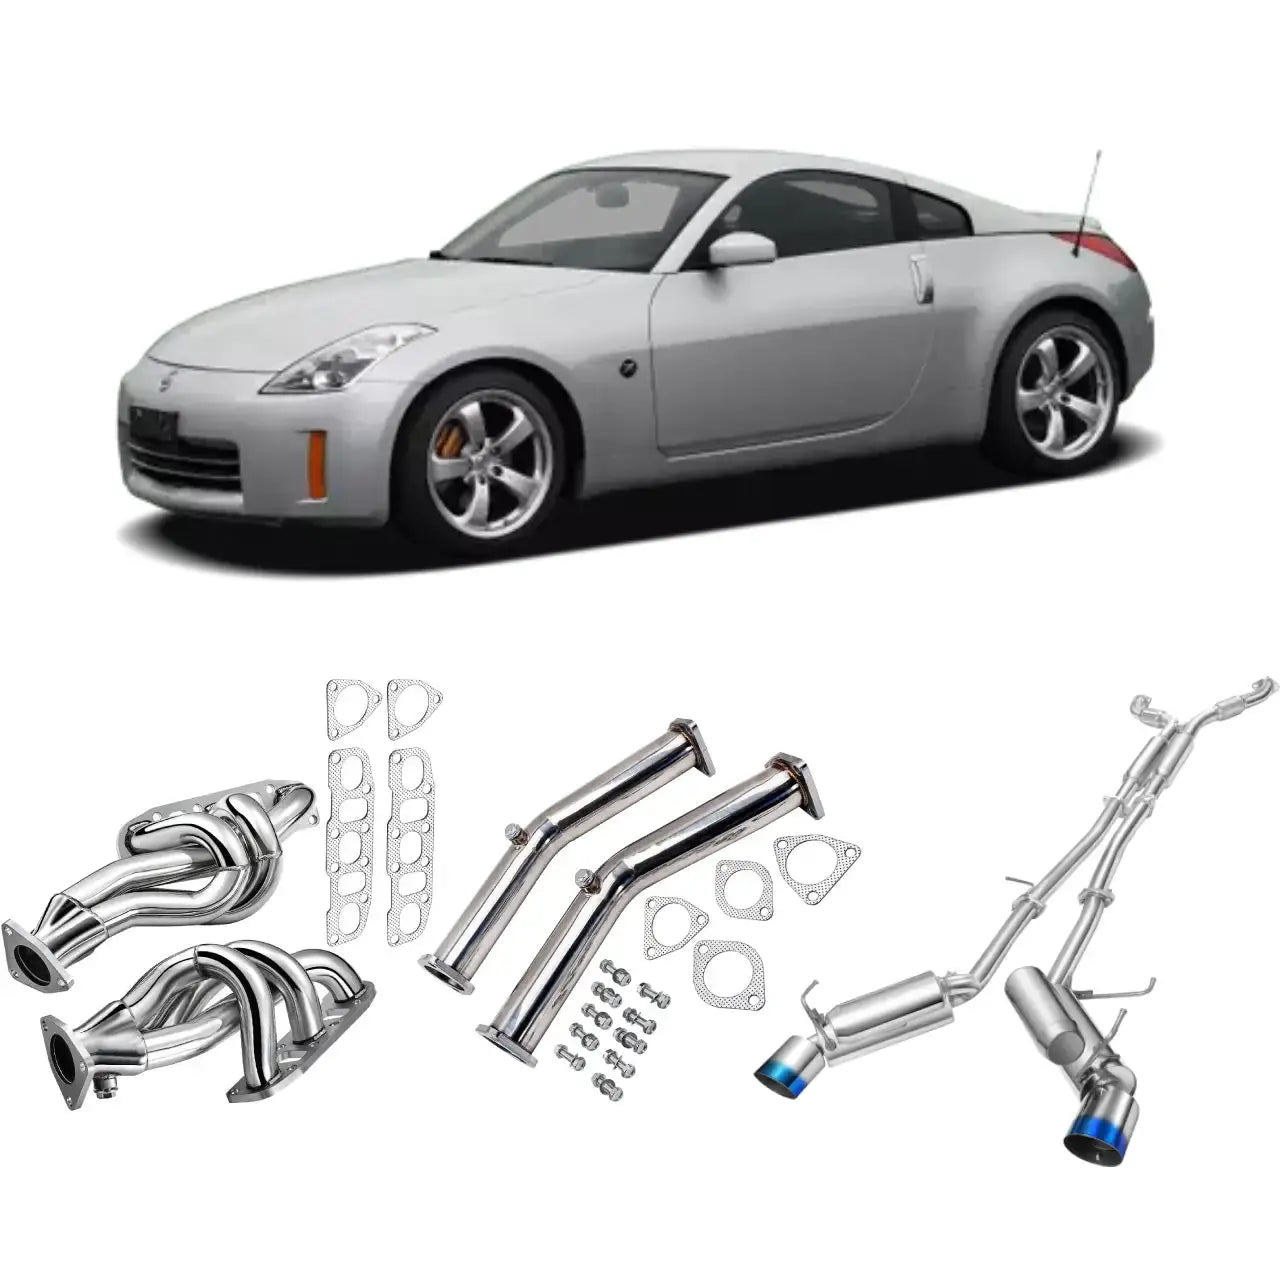 Exhaust Header/Downpipe/CatBack w/ 4.5" Dual Burnt Tips All-In-One Kit for 2003-2006 Nissan 350Z Flashark